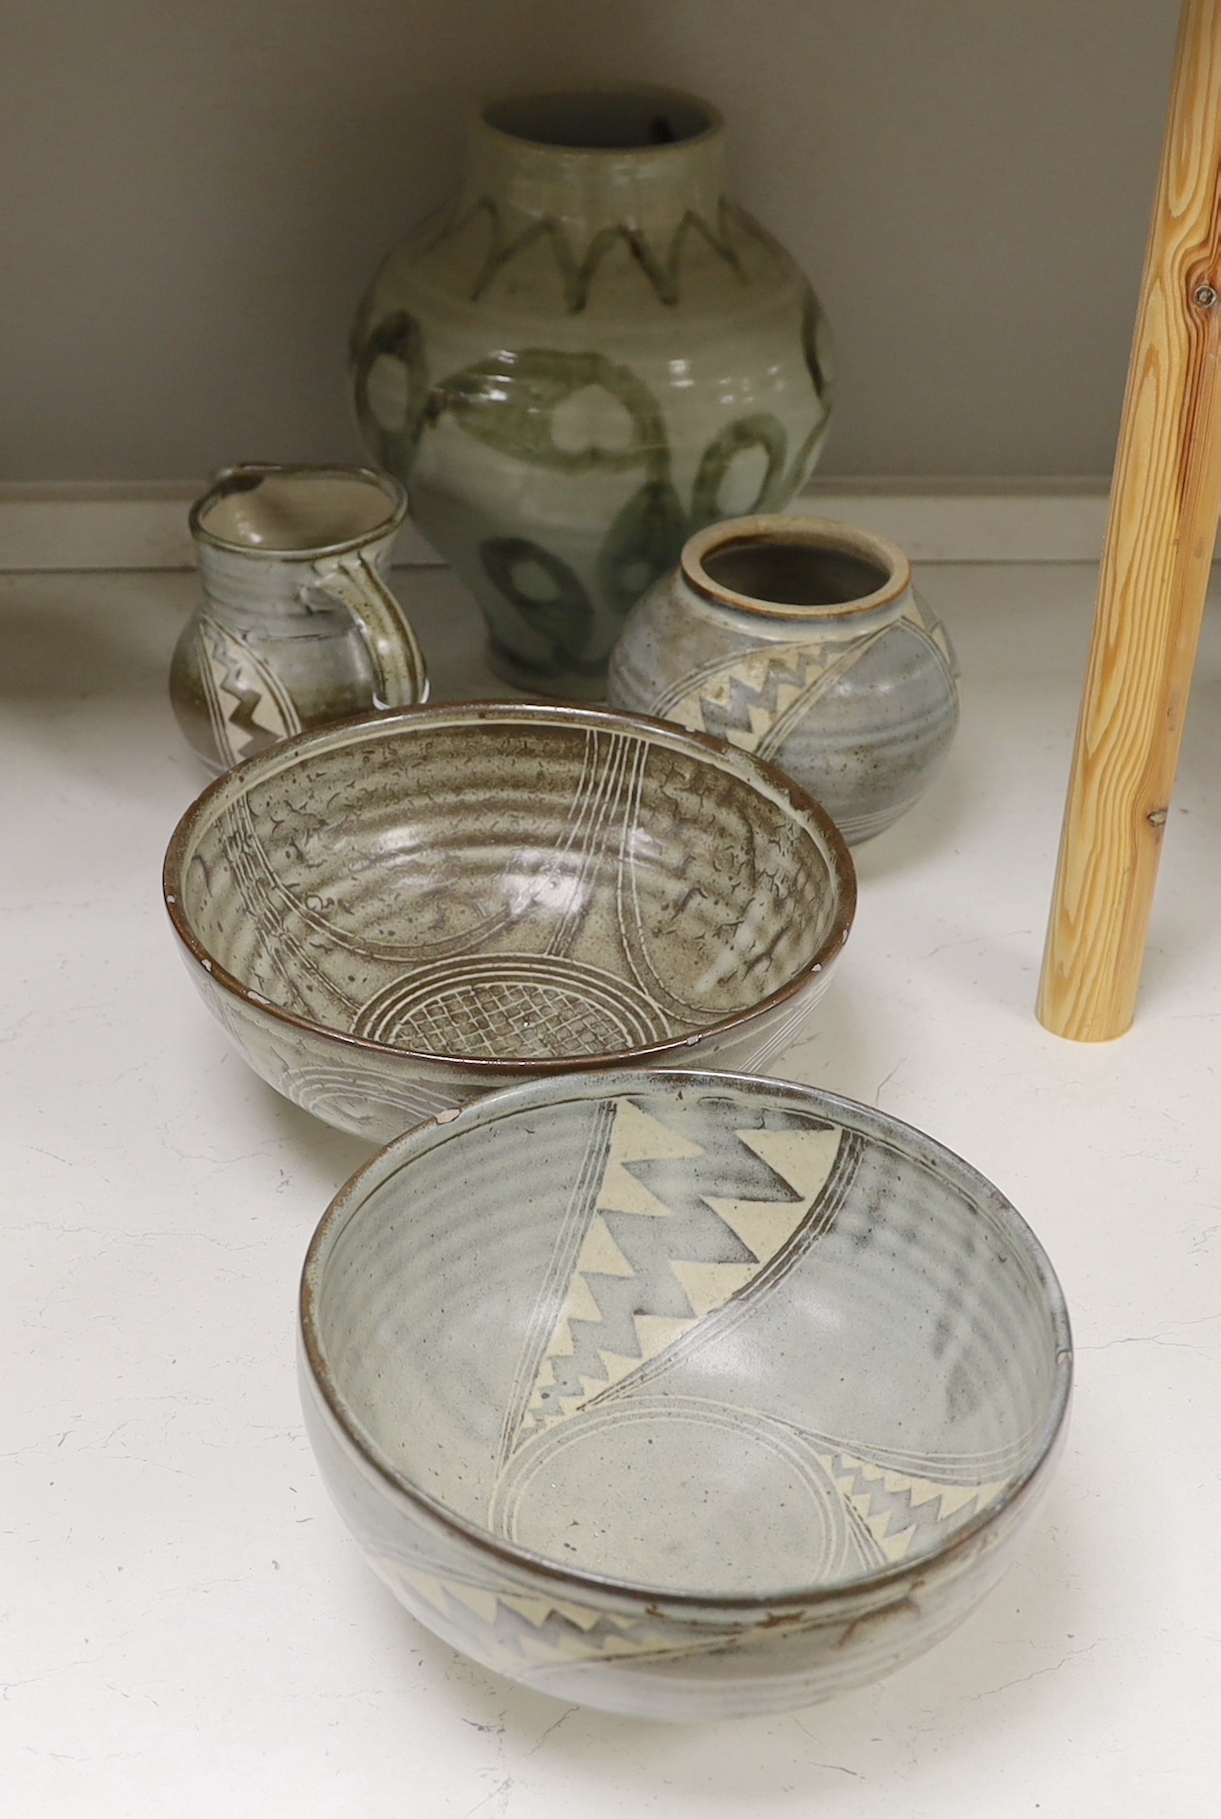 A 1961 Studio pottery vase and two bowls, a Studio pottery 'Gloucester' vase and a jug, largest 28cm